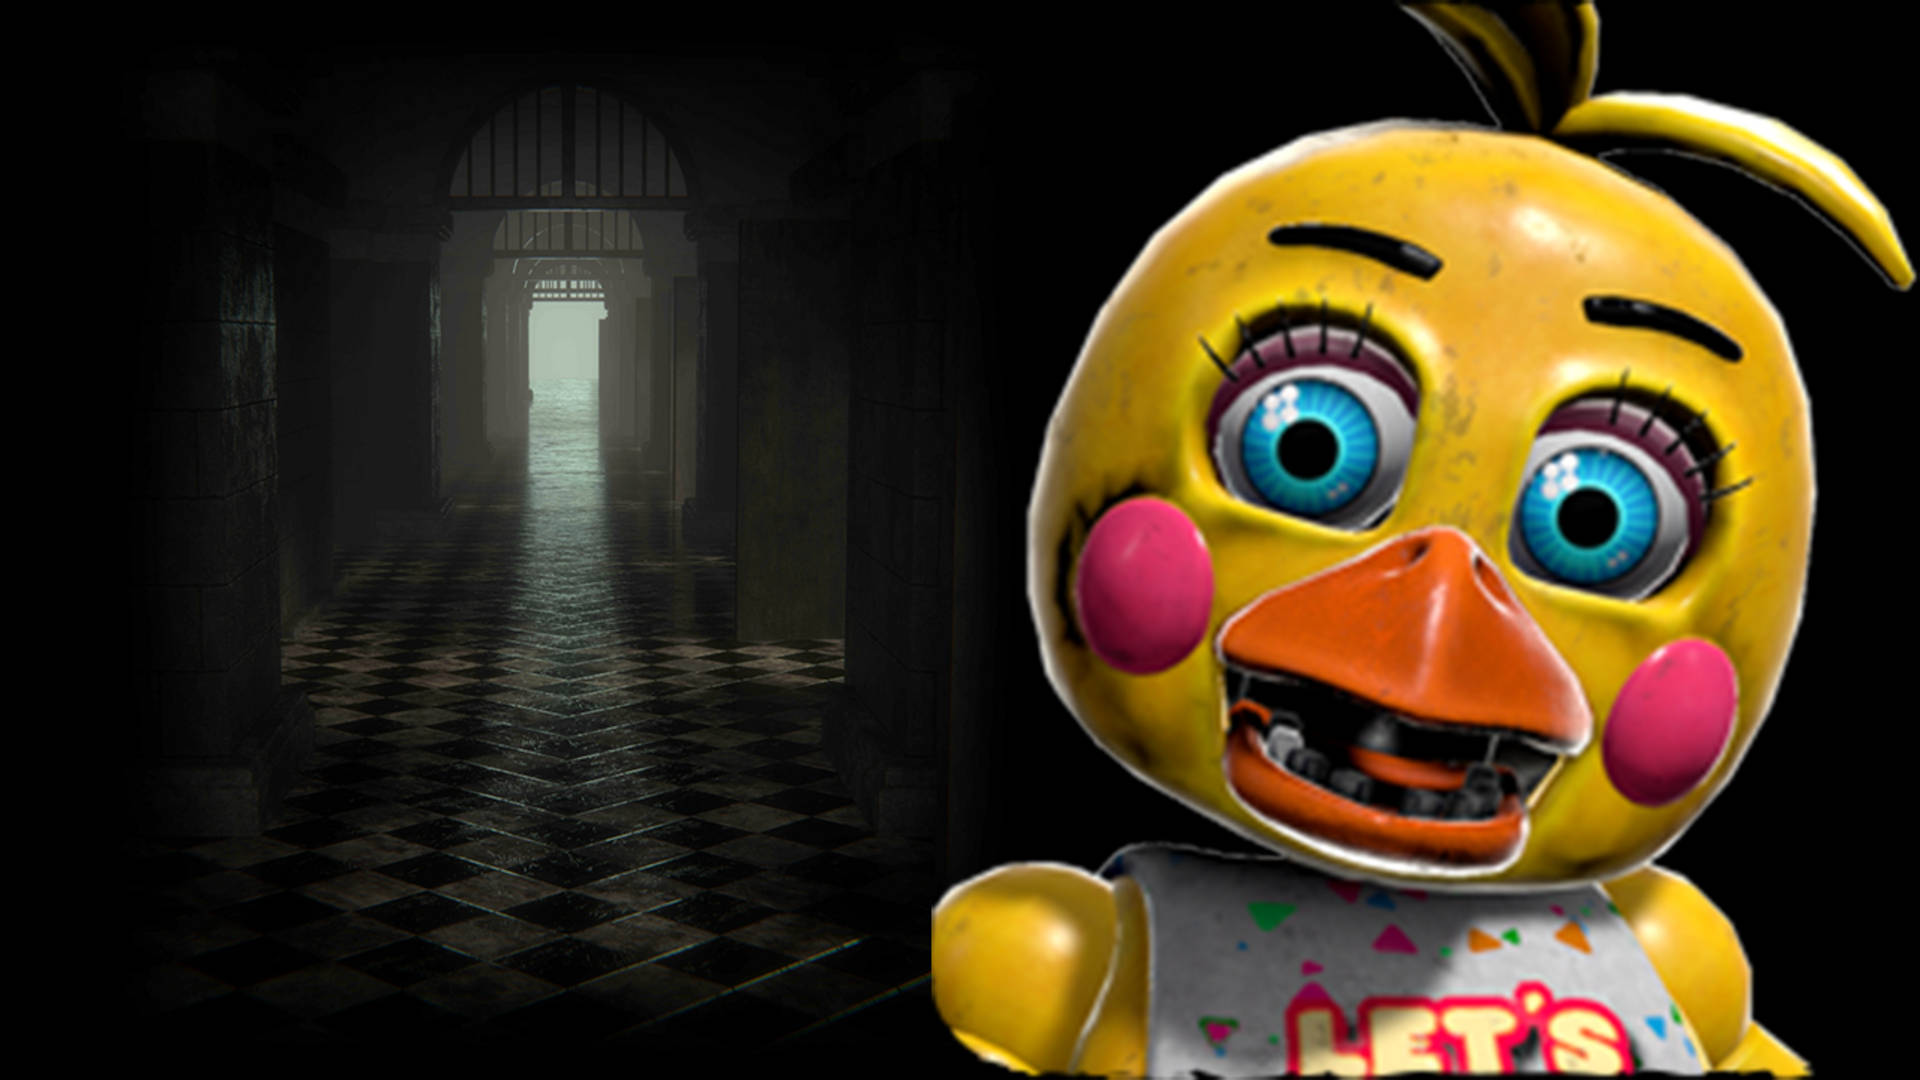 Intriguing Scene Of Toy Chica Navigating Through A Dark Hallway In Fnaf. Shrouded In Mystery With Stunning Details. Background